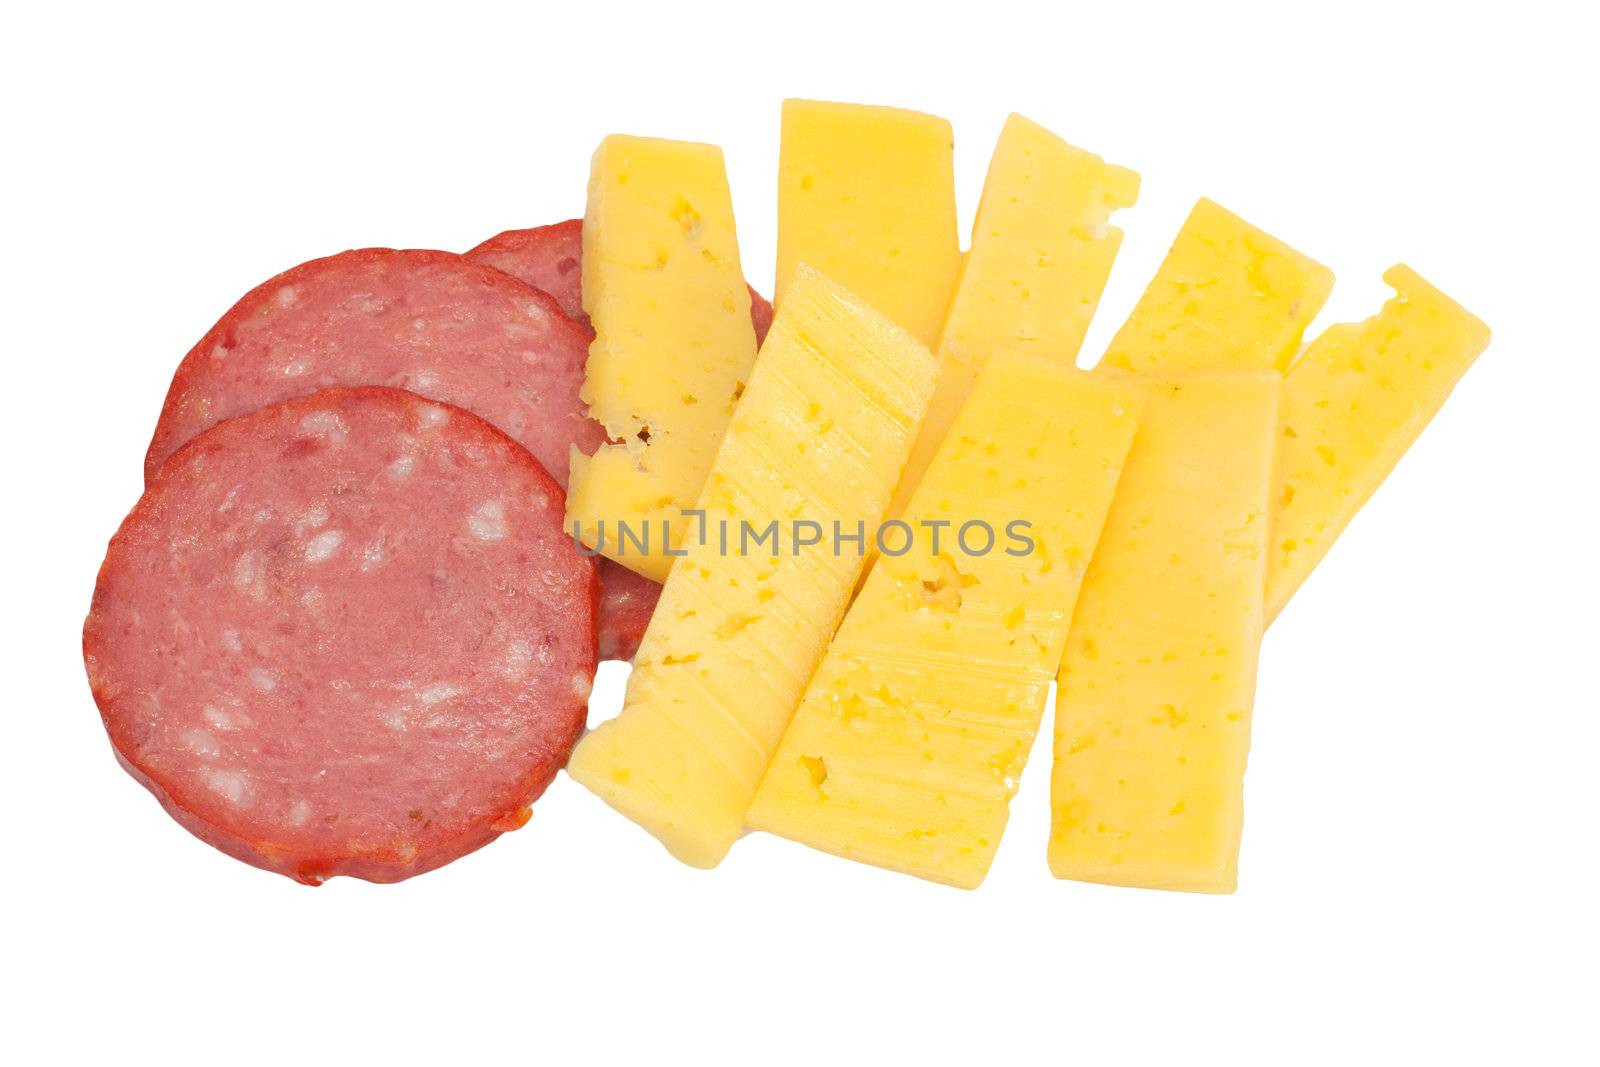 Sausage and cheese on a white background by schankz